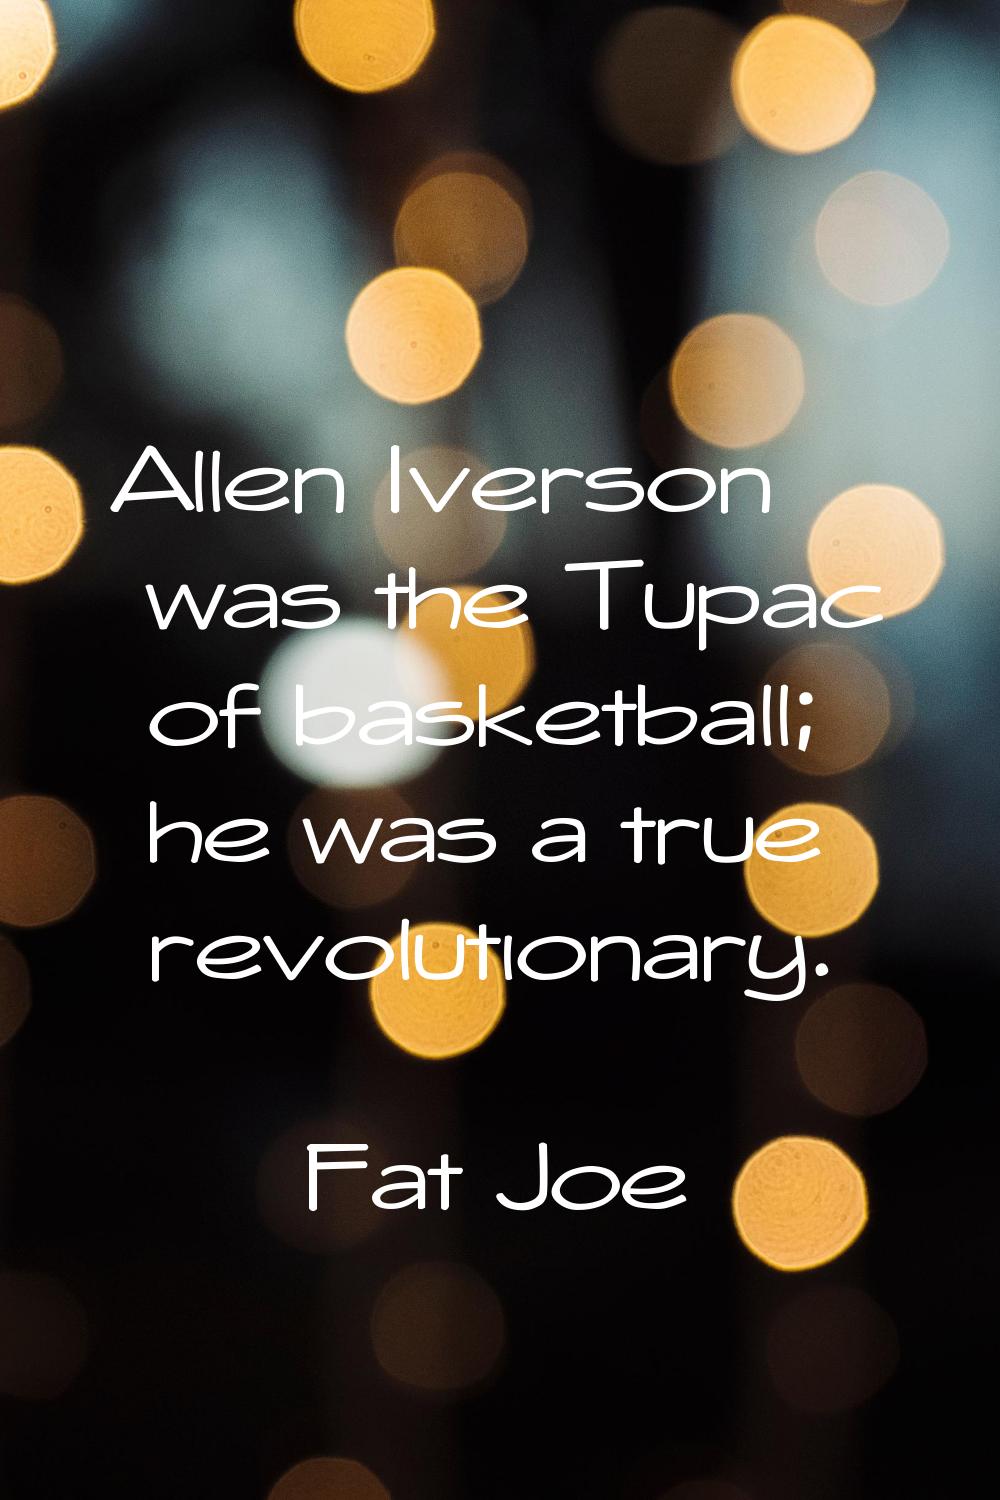 Allen Iverson was the Tupac of basketball; he was a true revolutionary.